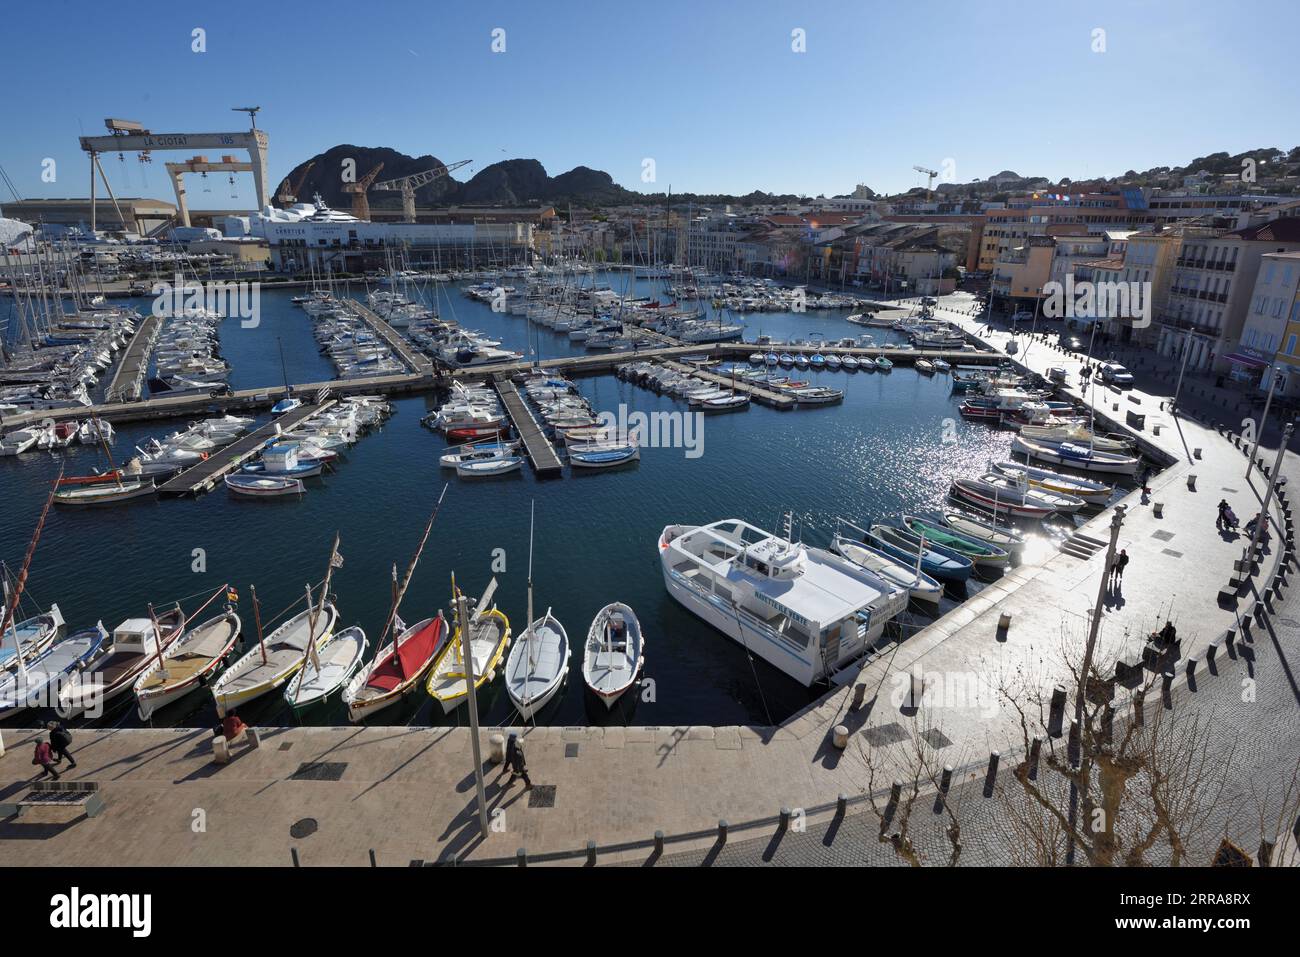 Panorama, Aerial View or High-Angle View over the Port, Harbour or Harbor of La Ciotat on the Mediterranean Coast Bouches-du-Rhones Provence France Stock Photo